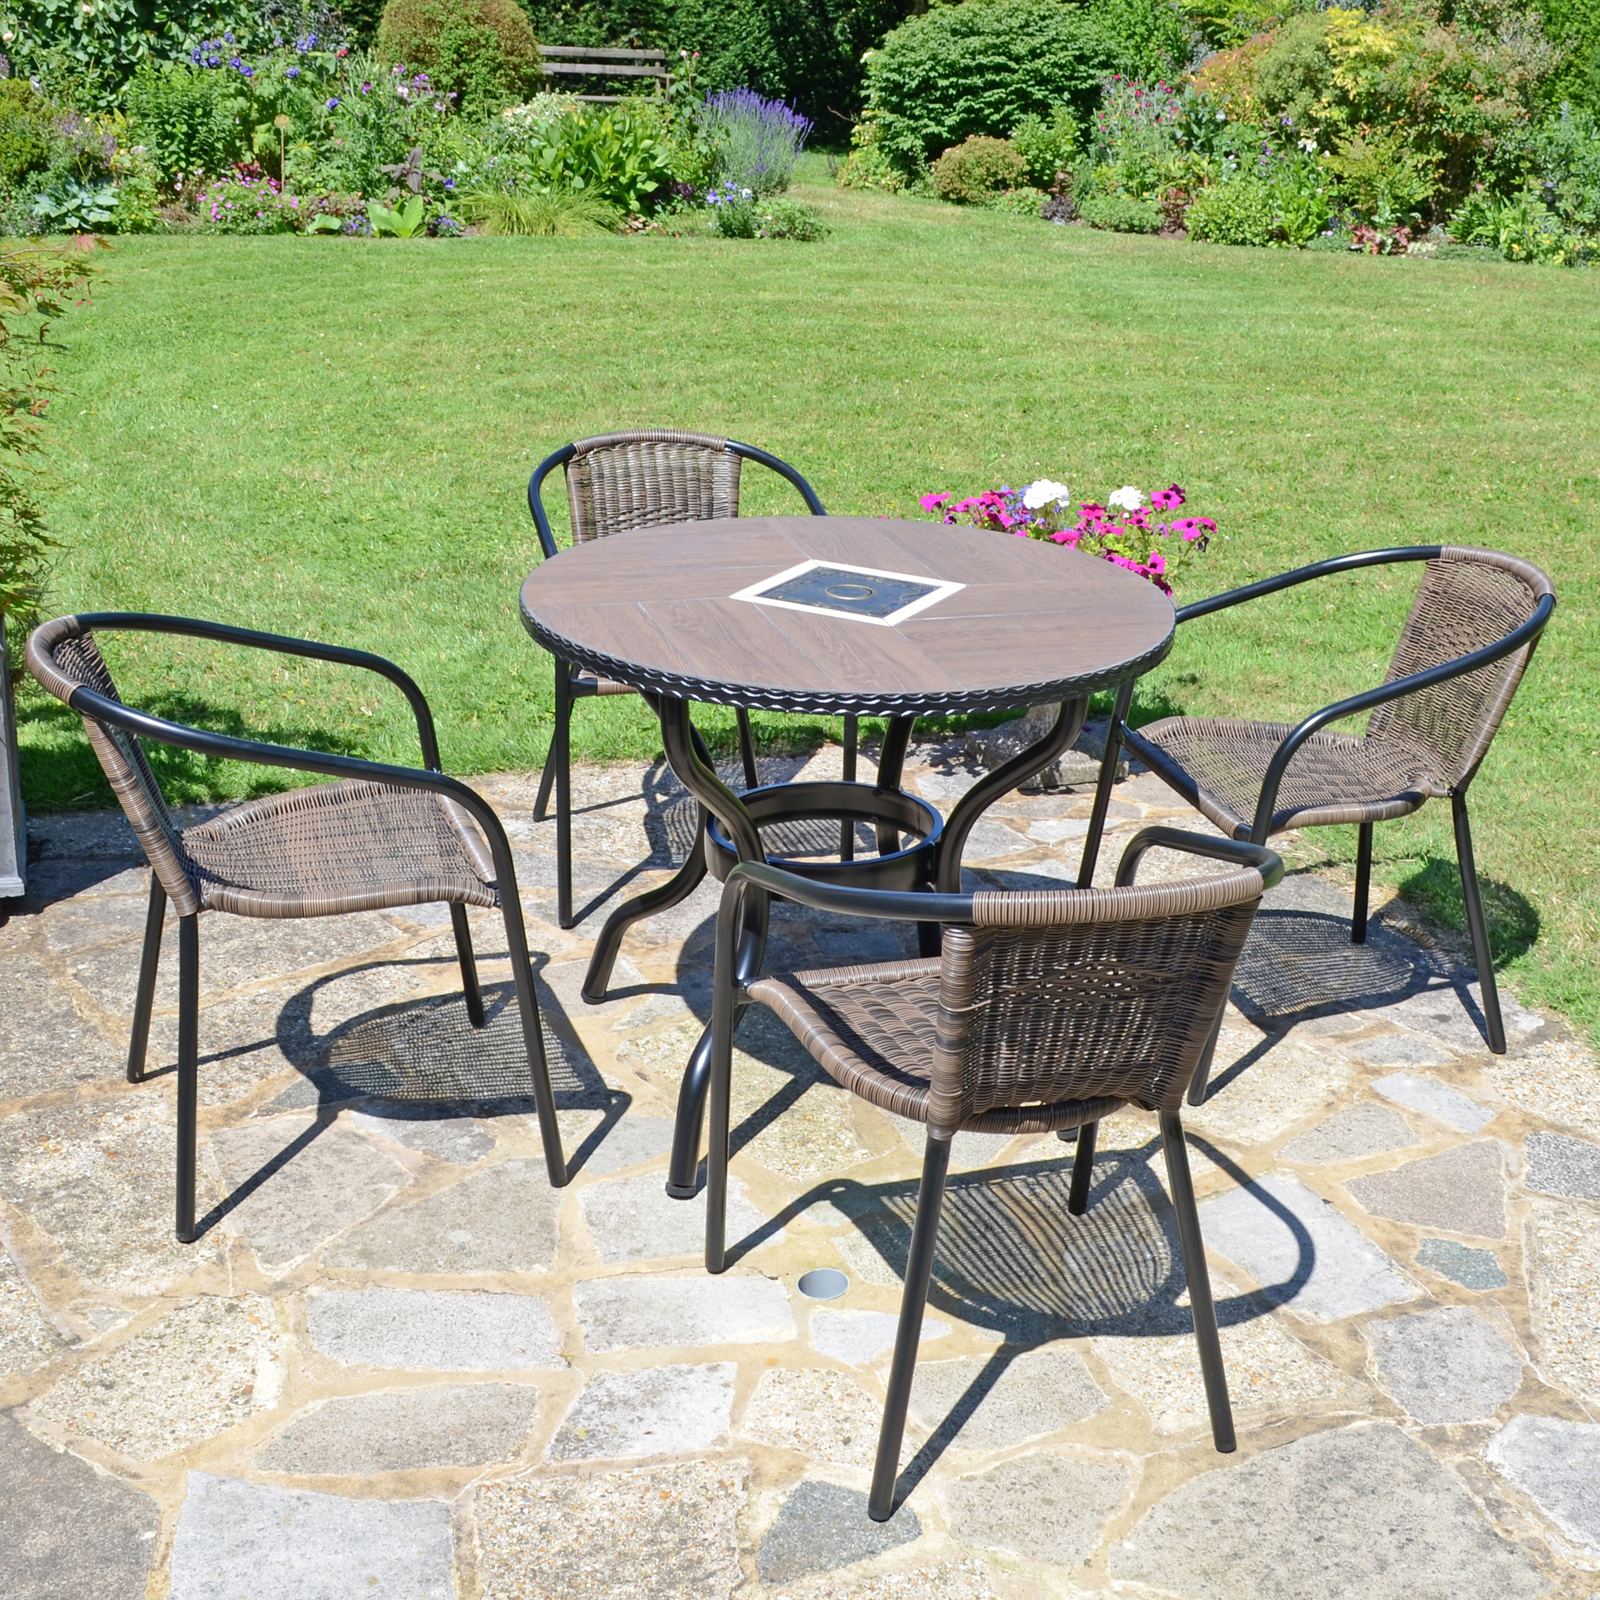 Exclusive Garden Haslemere 91 cm Round Table with 4 San Remo Chairs Garden Set Dining Set Dining Sets Exclusive Garden   